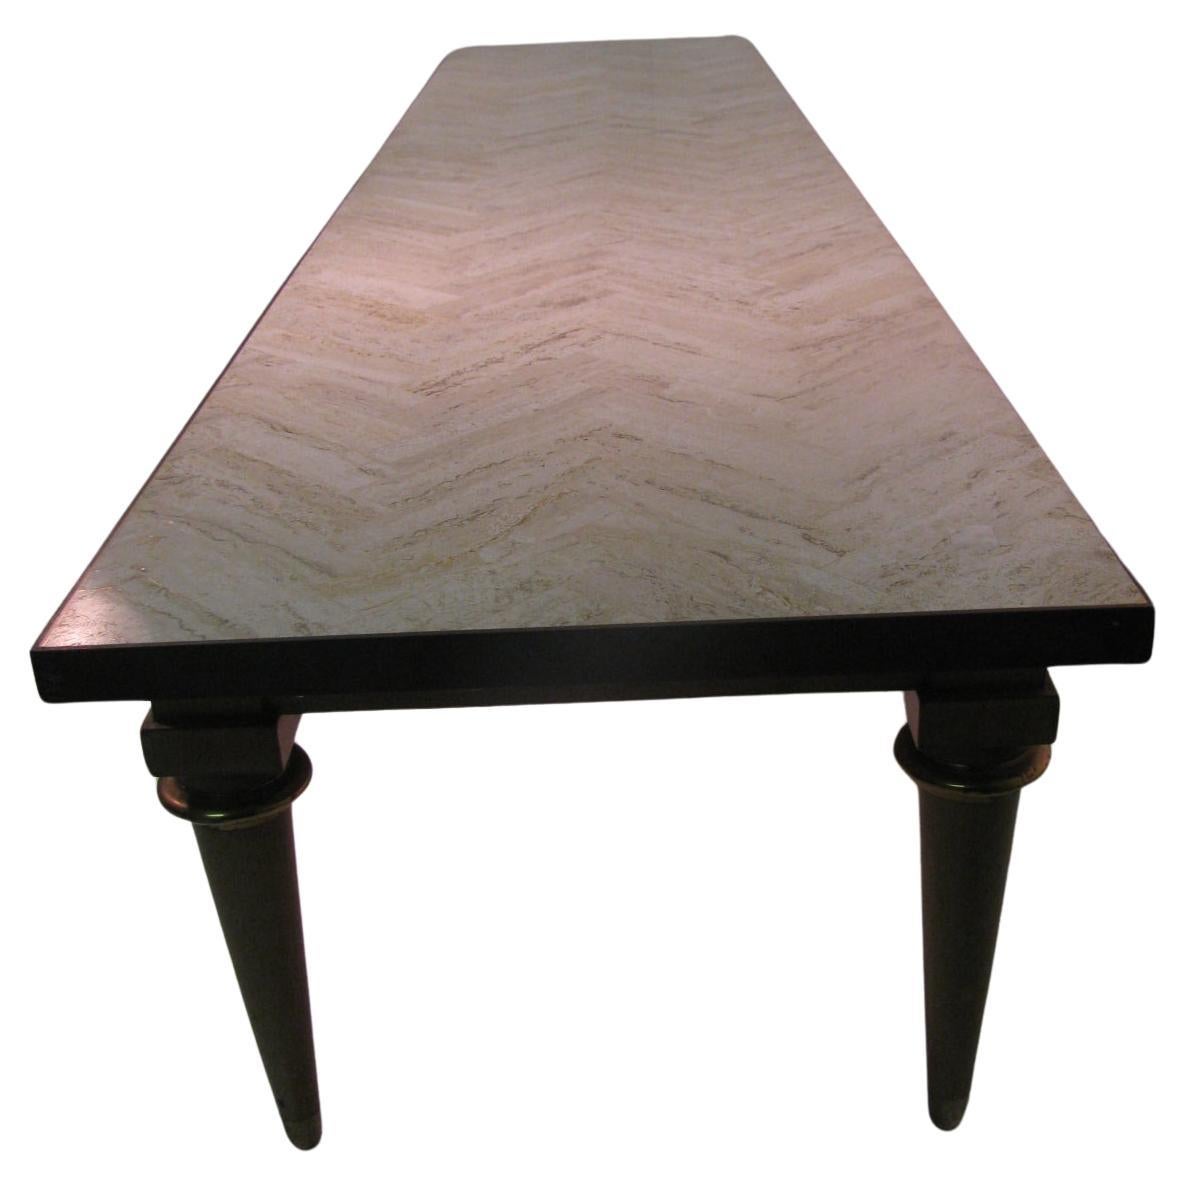 Beautiful simple and elegant. Architecturally styled in its length [75 in.] with a Quilted Herringbone design in the limestone Marble top. Marble top is framed in Bronze. Turned Legs with a Brass ring end with a brass sabot. The wood is Walnut. Most